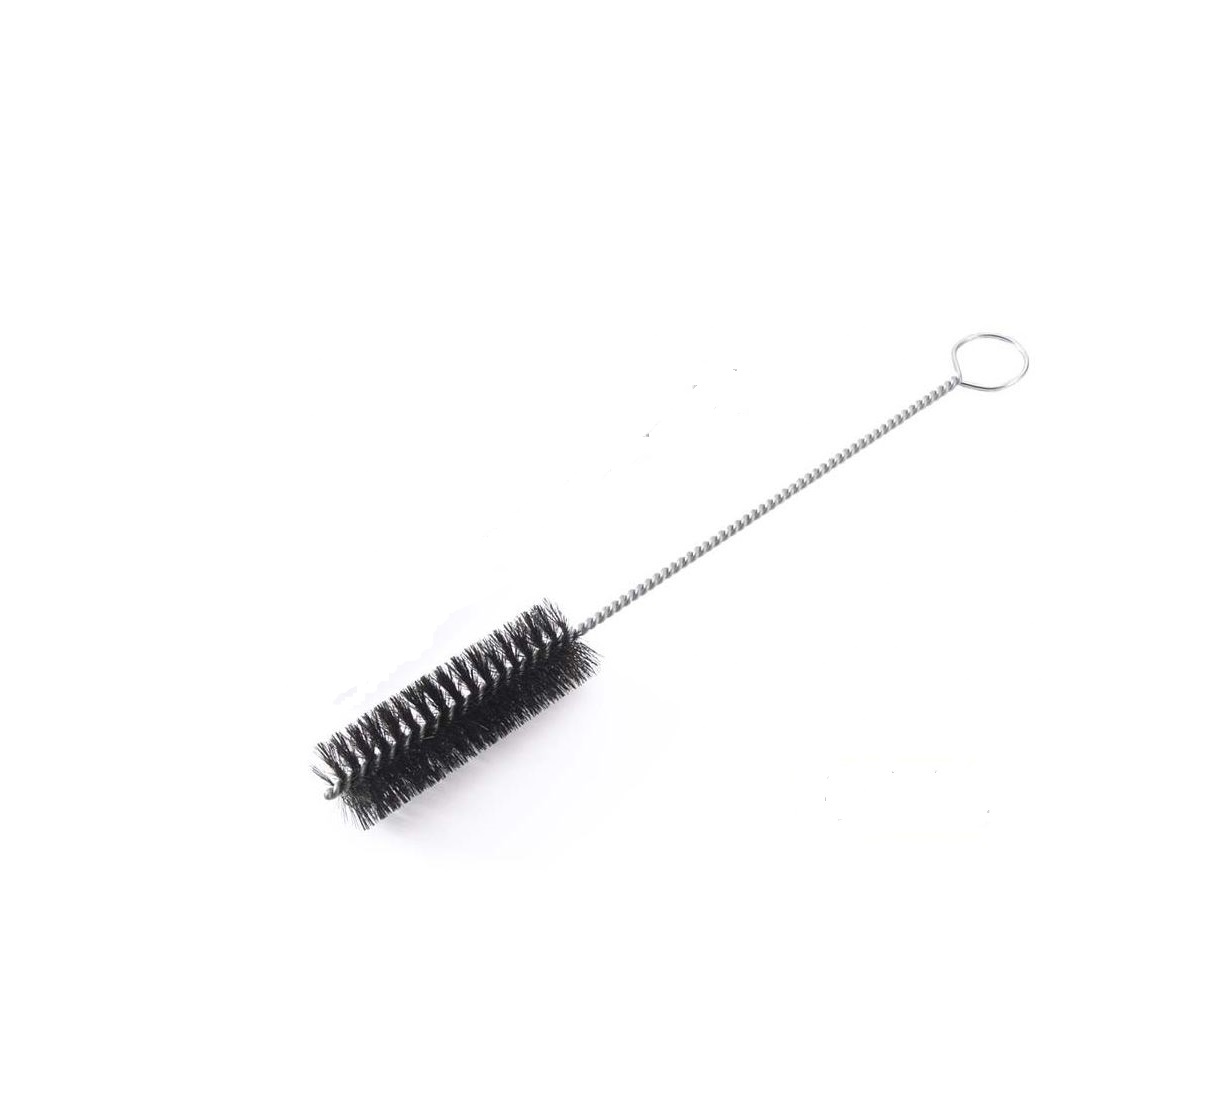 Gas Stove Cleaning Brush Kitchen Tool Stainless Steel Nylon Copper Wire  Brushes.